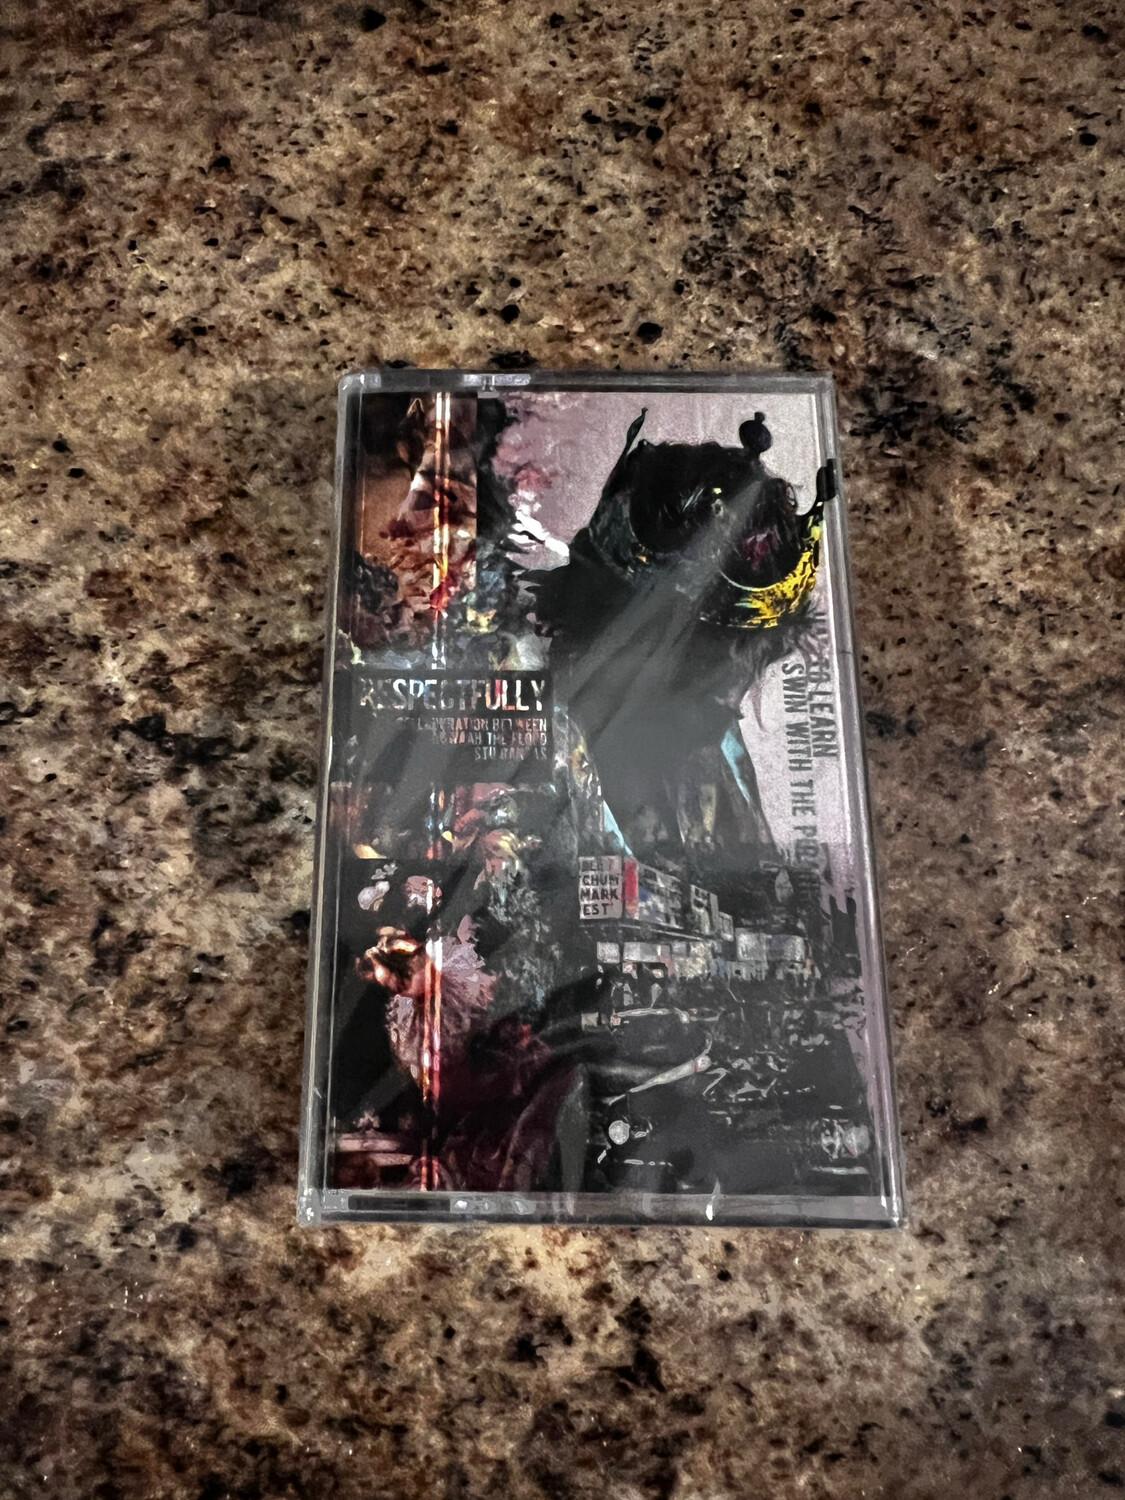 Stu Bangas X Nowaah the Flood “Respectfully ” Cassettes (10 In TOTAL)